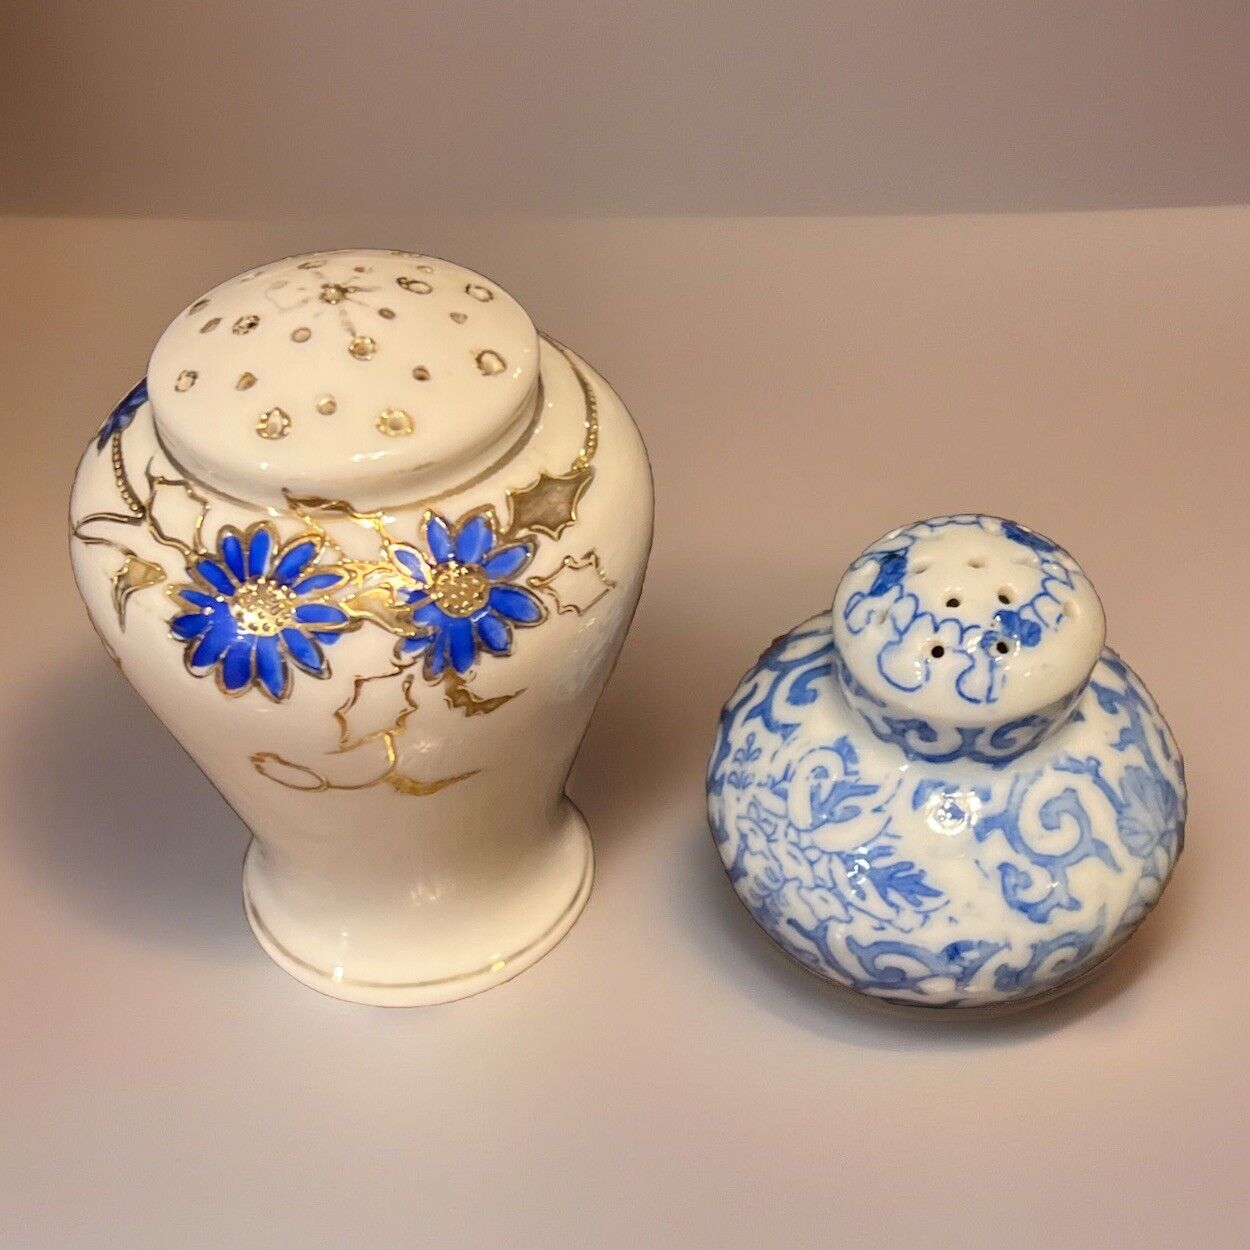 Antique Rare Hand-painted Salt and Pepper Shakers, One Porcelain And One Japan